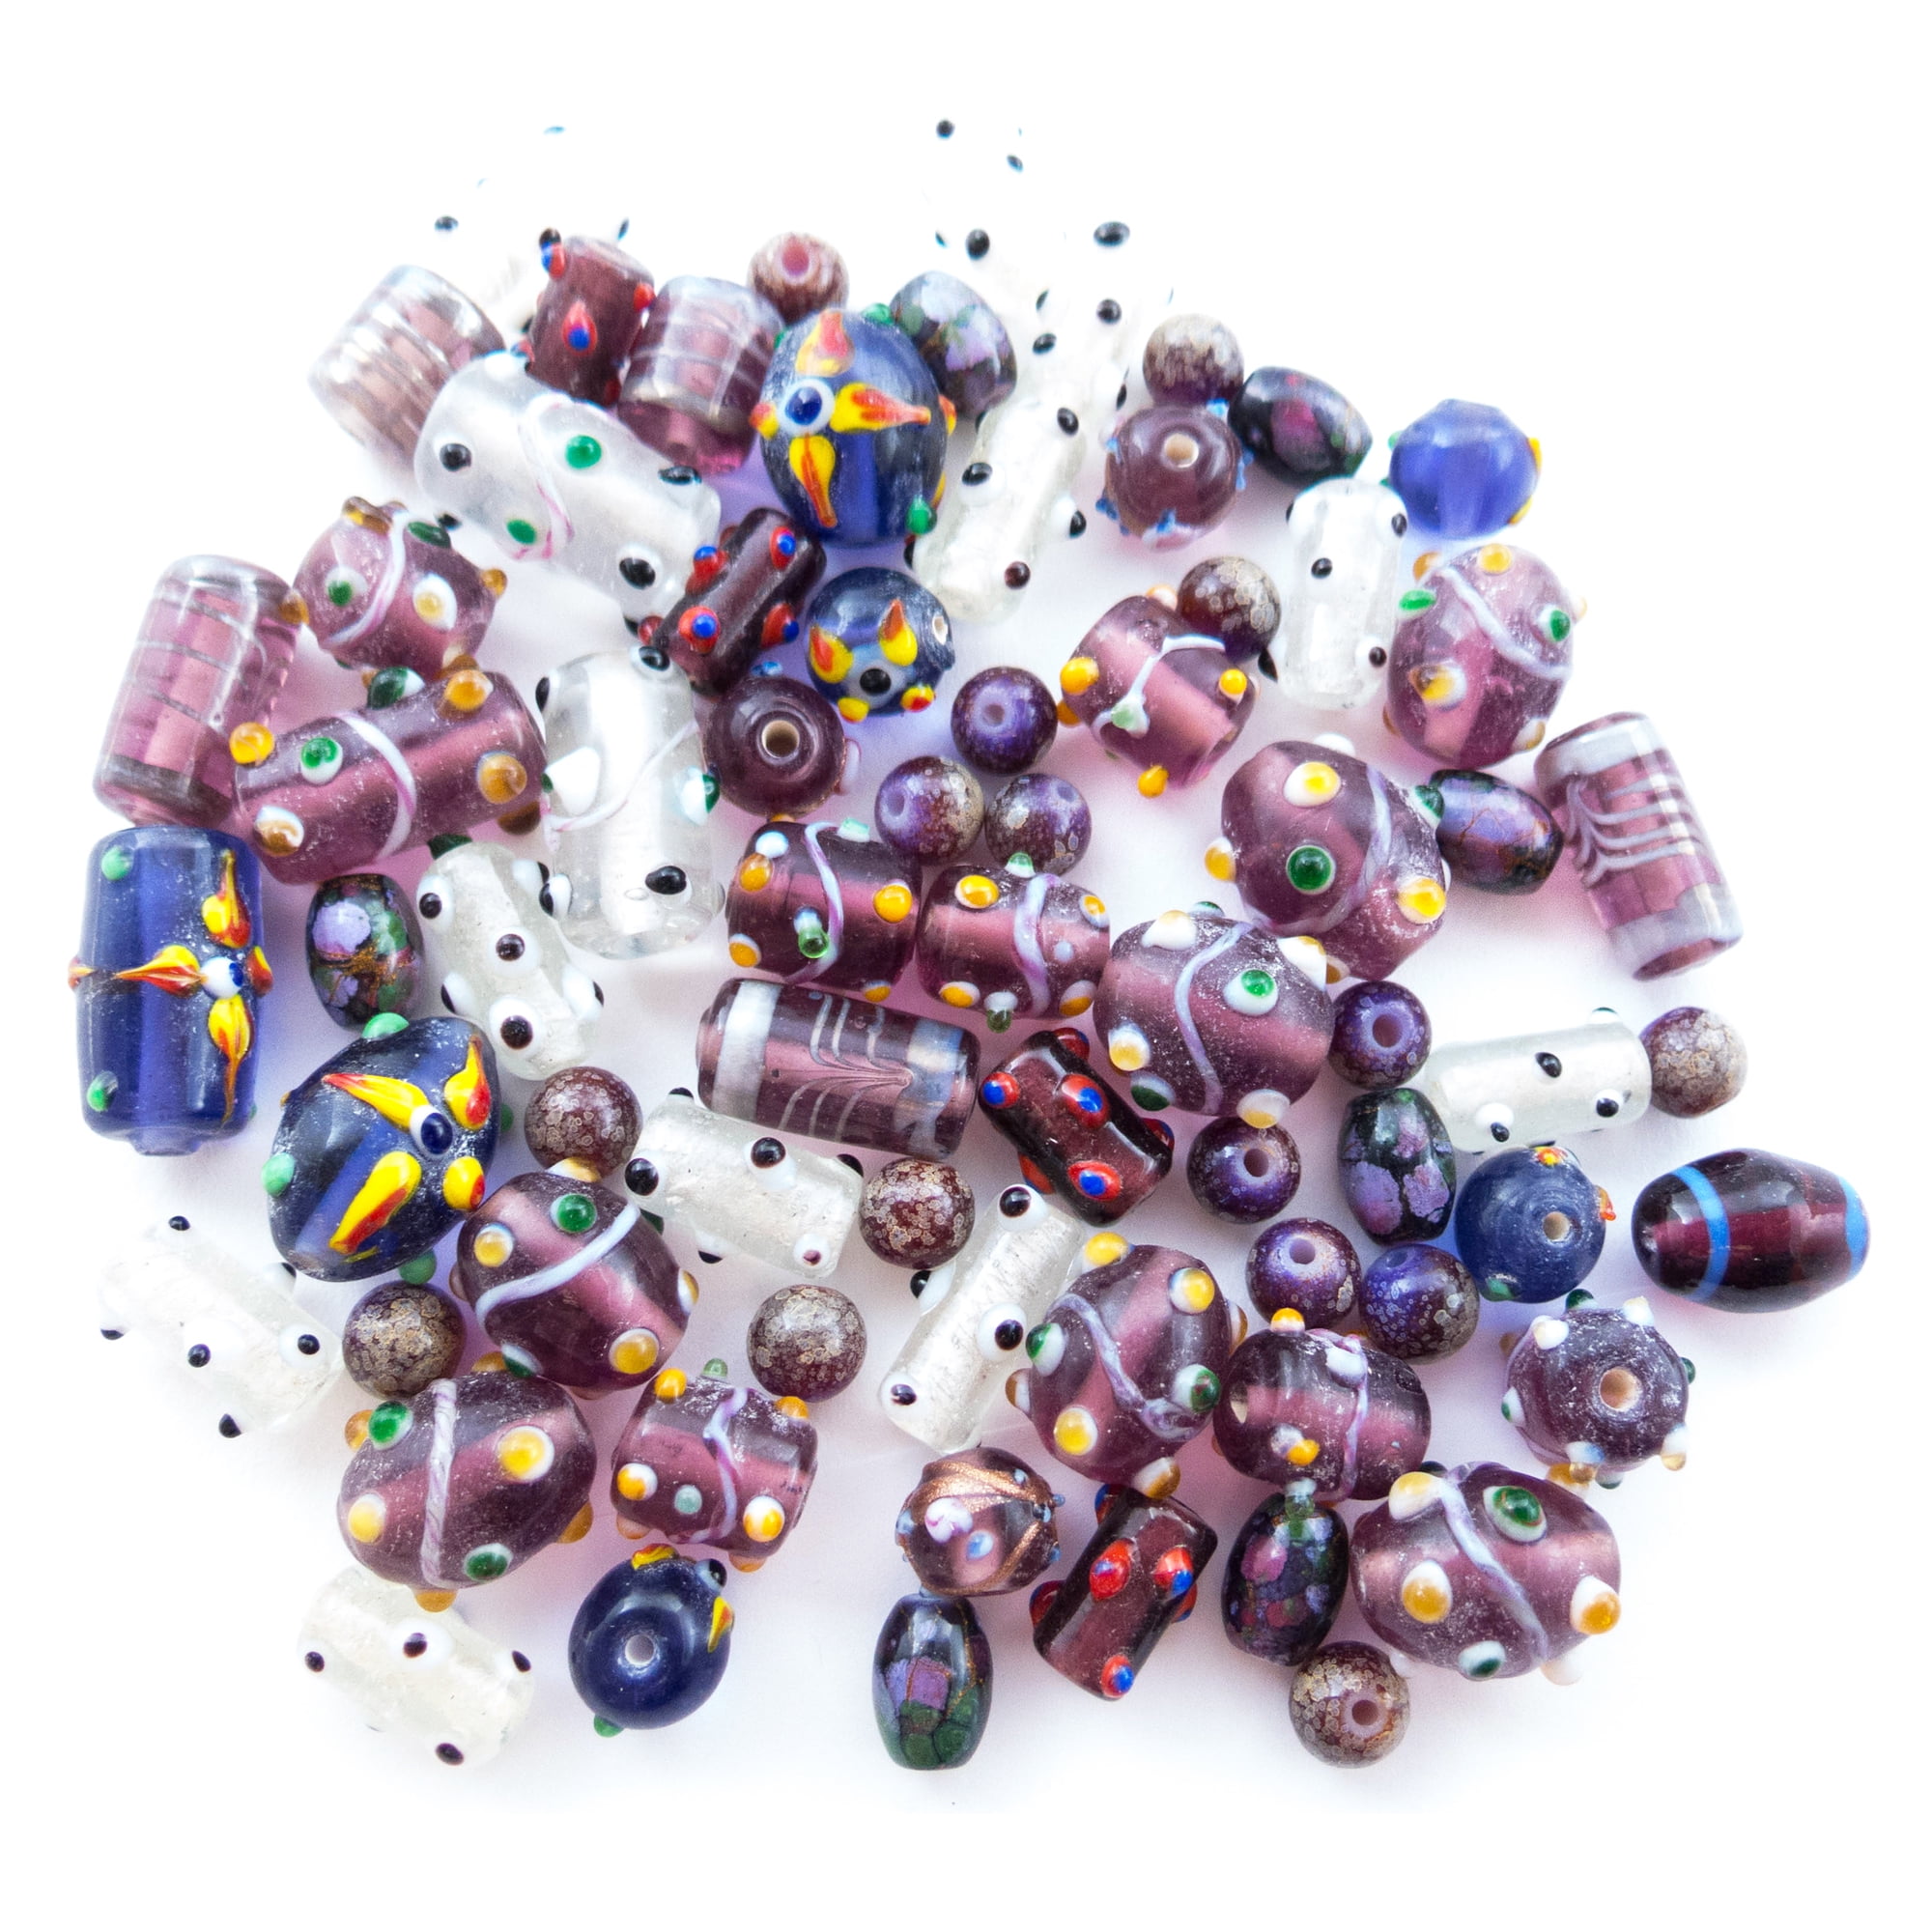 Fun-Weevz 120-140 Pcs Assorted Glass Beads for Jewelry Making Adults, Bulk Glass Beads for Crafts, Lampwork Murano Bead Mix